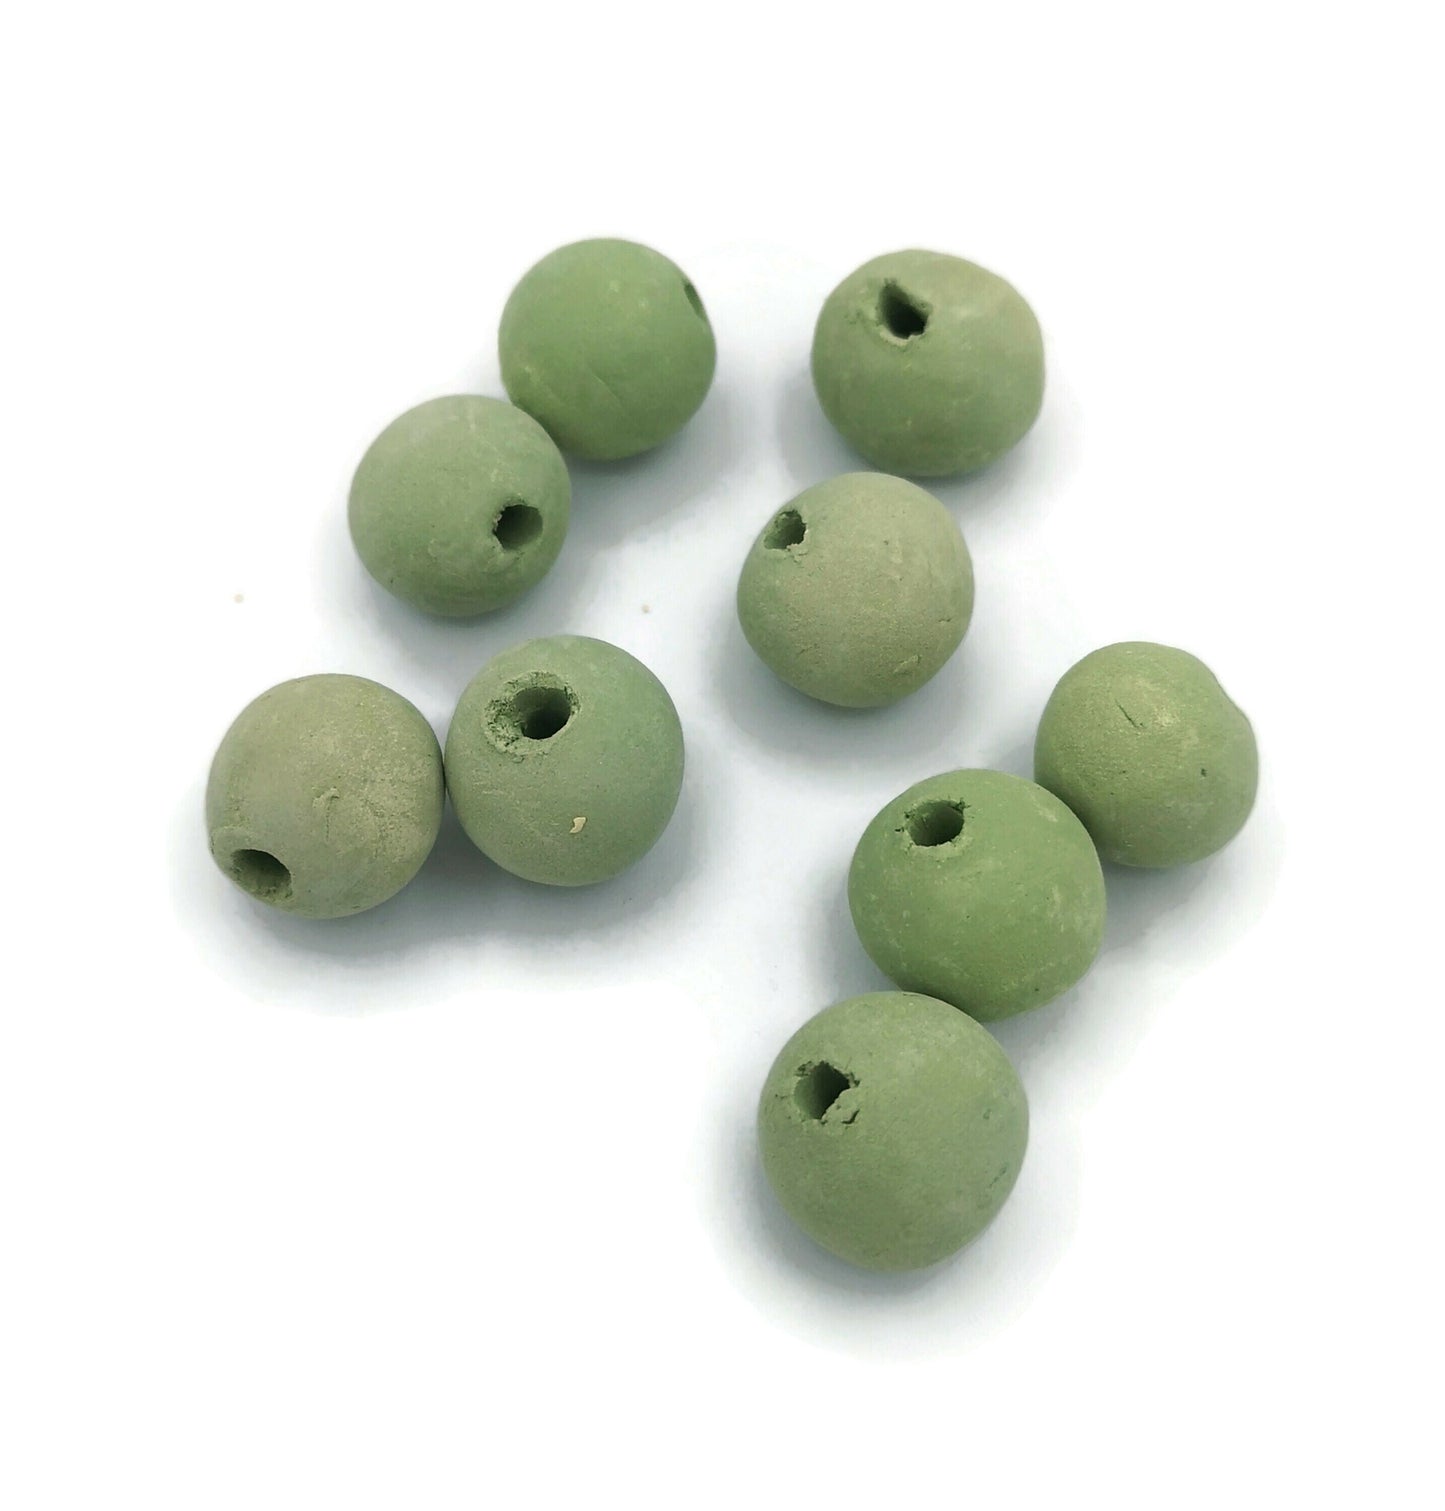 SPACER BEADS, UNQUE Set of 10 Round Shaped Ceramic Beads For Decorating, Crafting Or Macrame, Bubblegum Beads For Jewelry Making, Clay Beads - Ceramica Ana Rafael